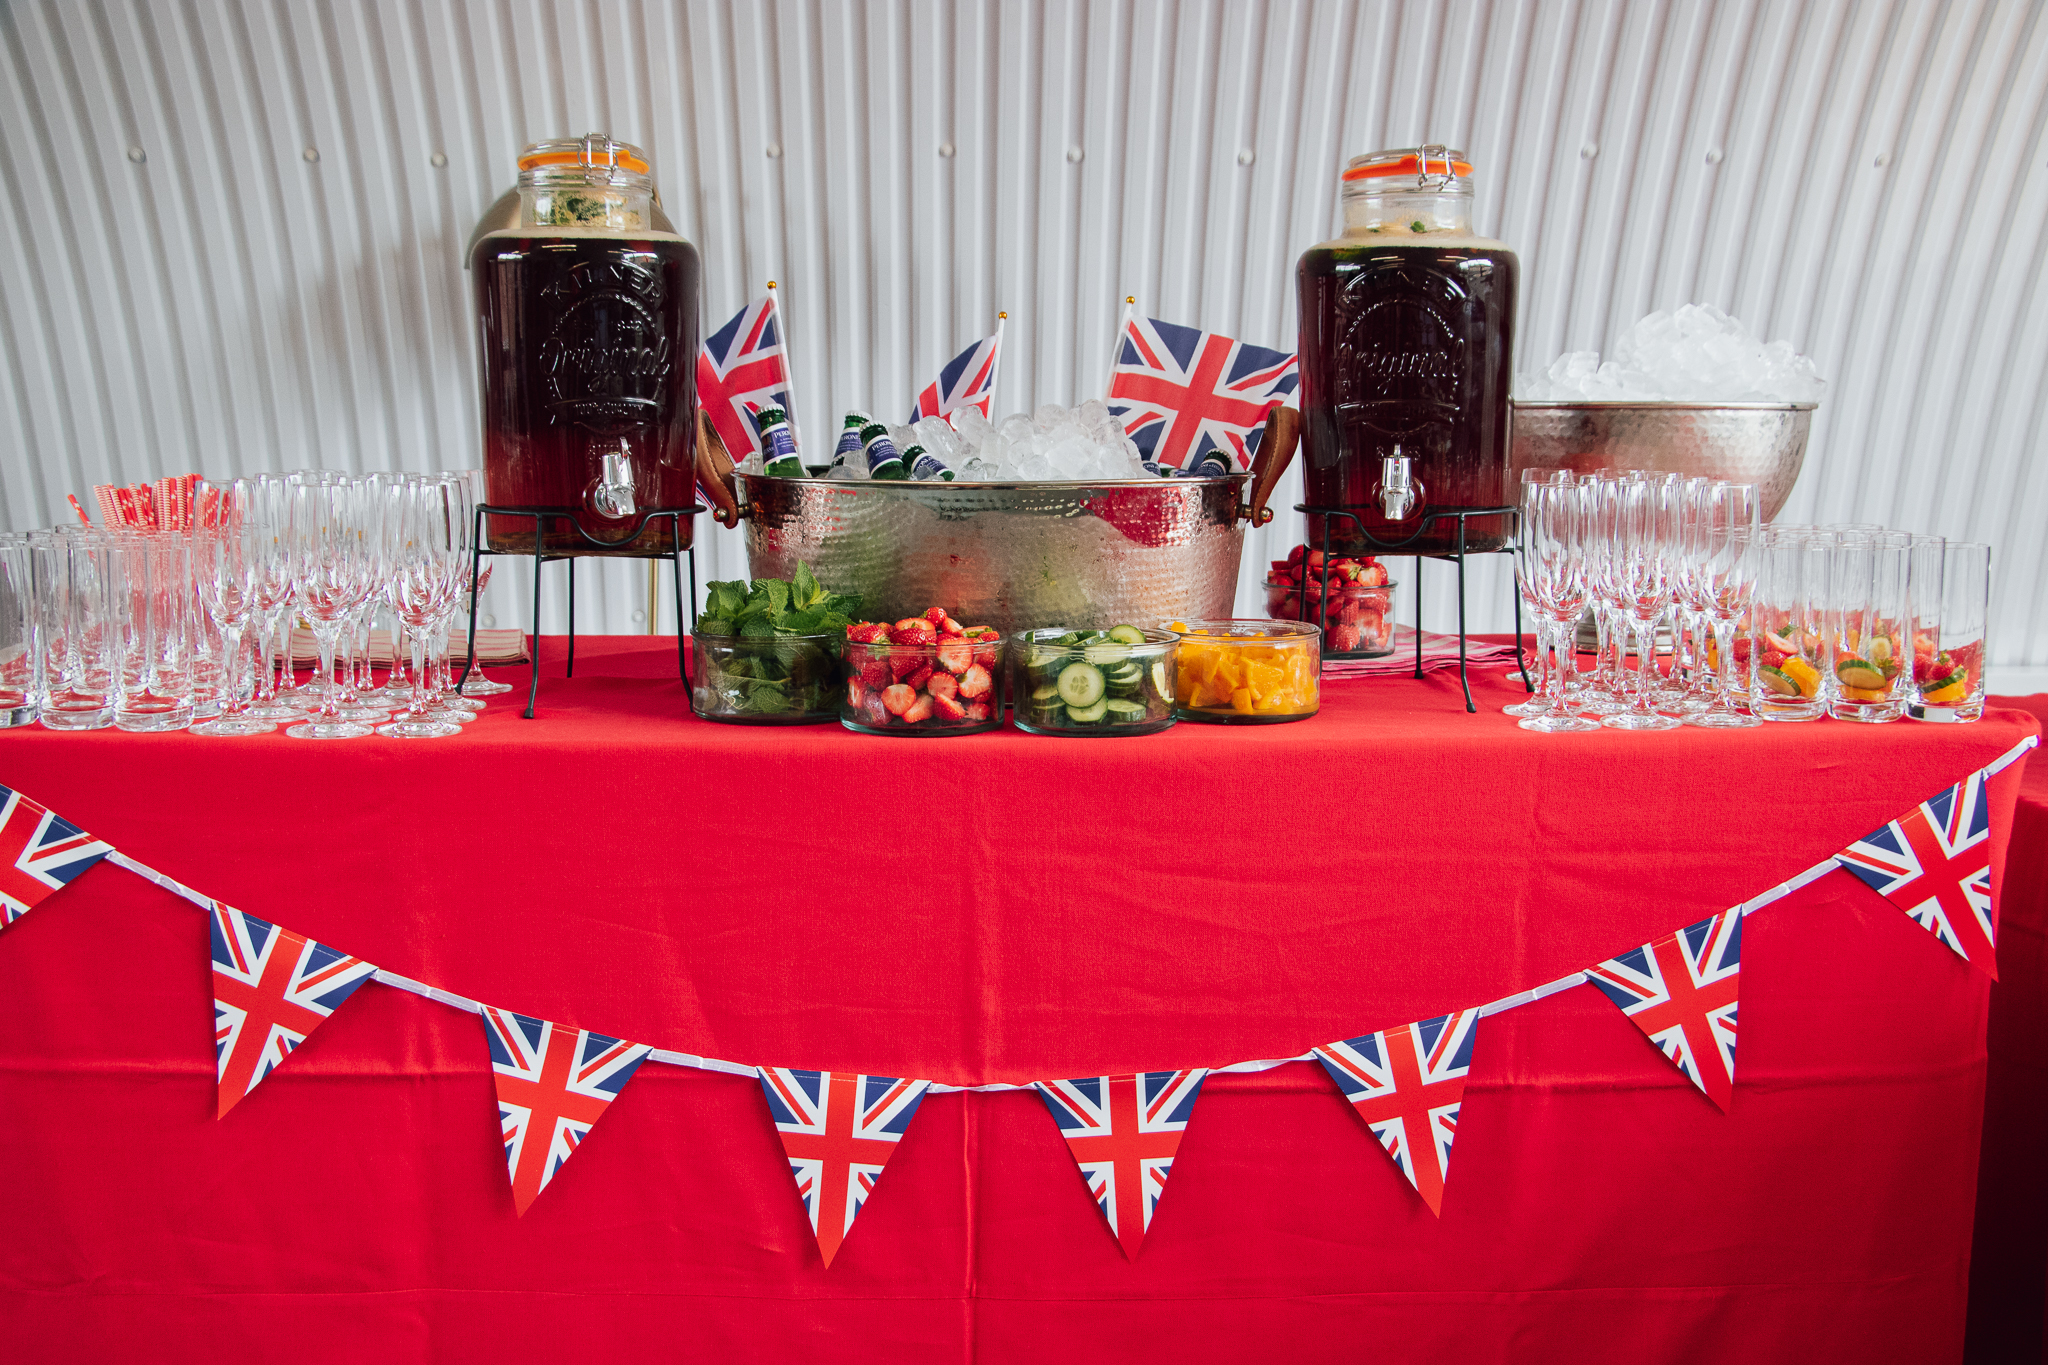 party drinks on table with bunting